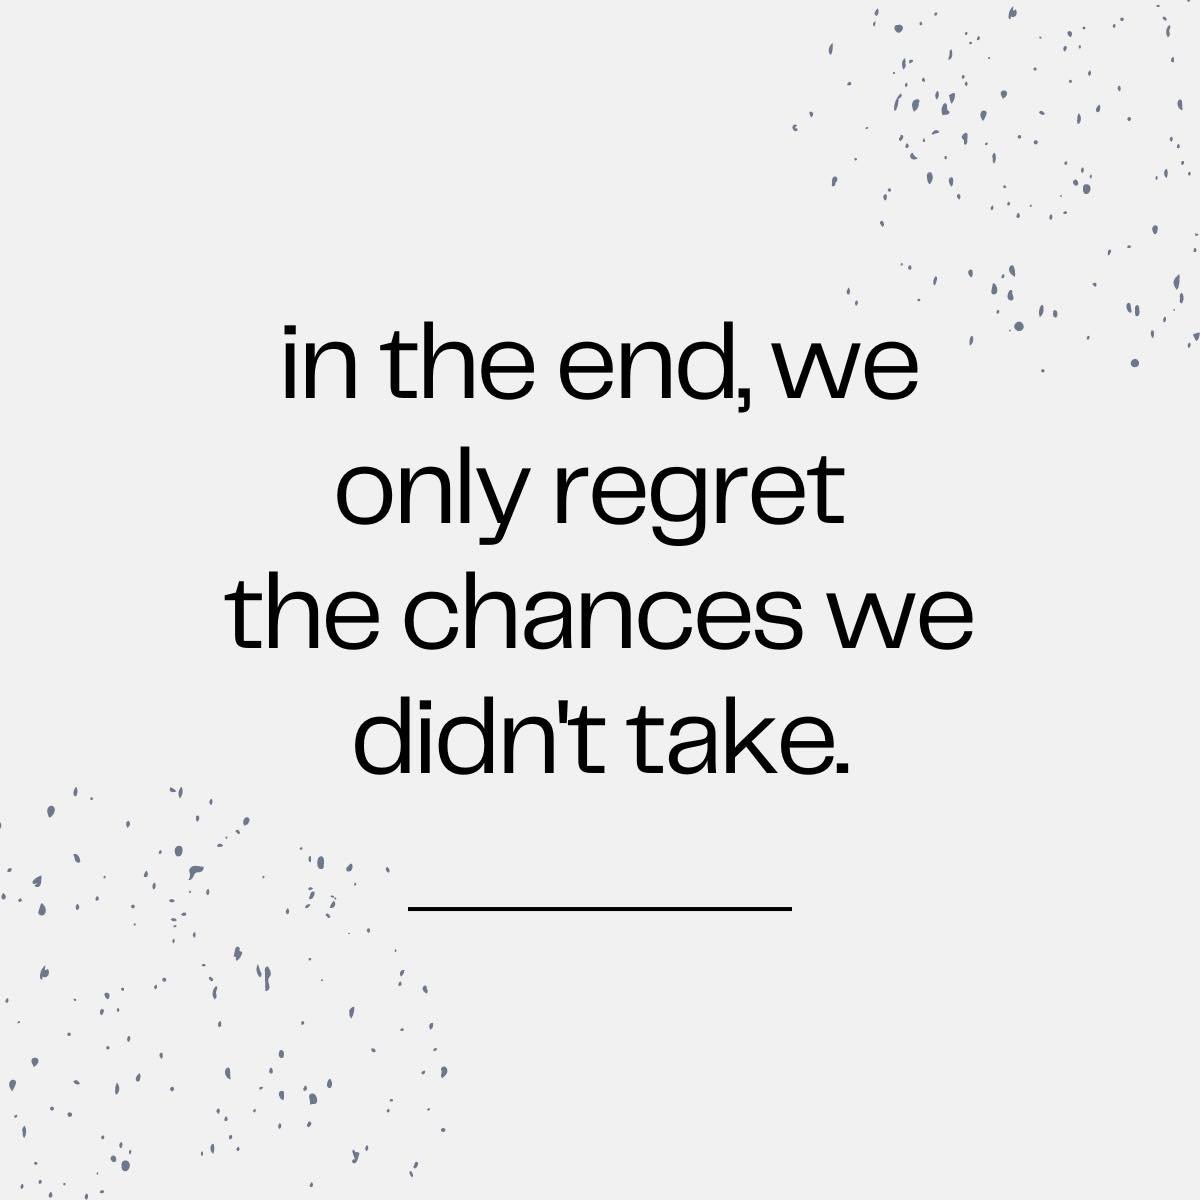 Don't let regrets weigh you down! Take those chances, leap into the unknown. It's scary until you realize your potential. Embrace the journey! ✨ 

#ChasingDreams #BelieveYouCan #RiskTaker #OwnYourJourney #TrustYourself #McIntoshMortgageGroup #TriciaM